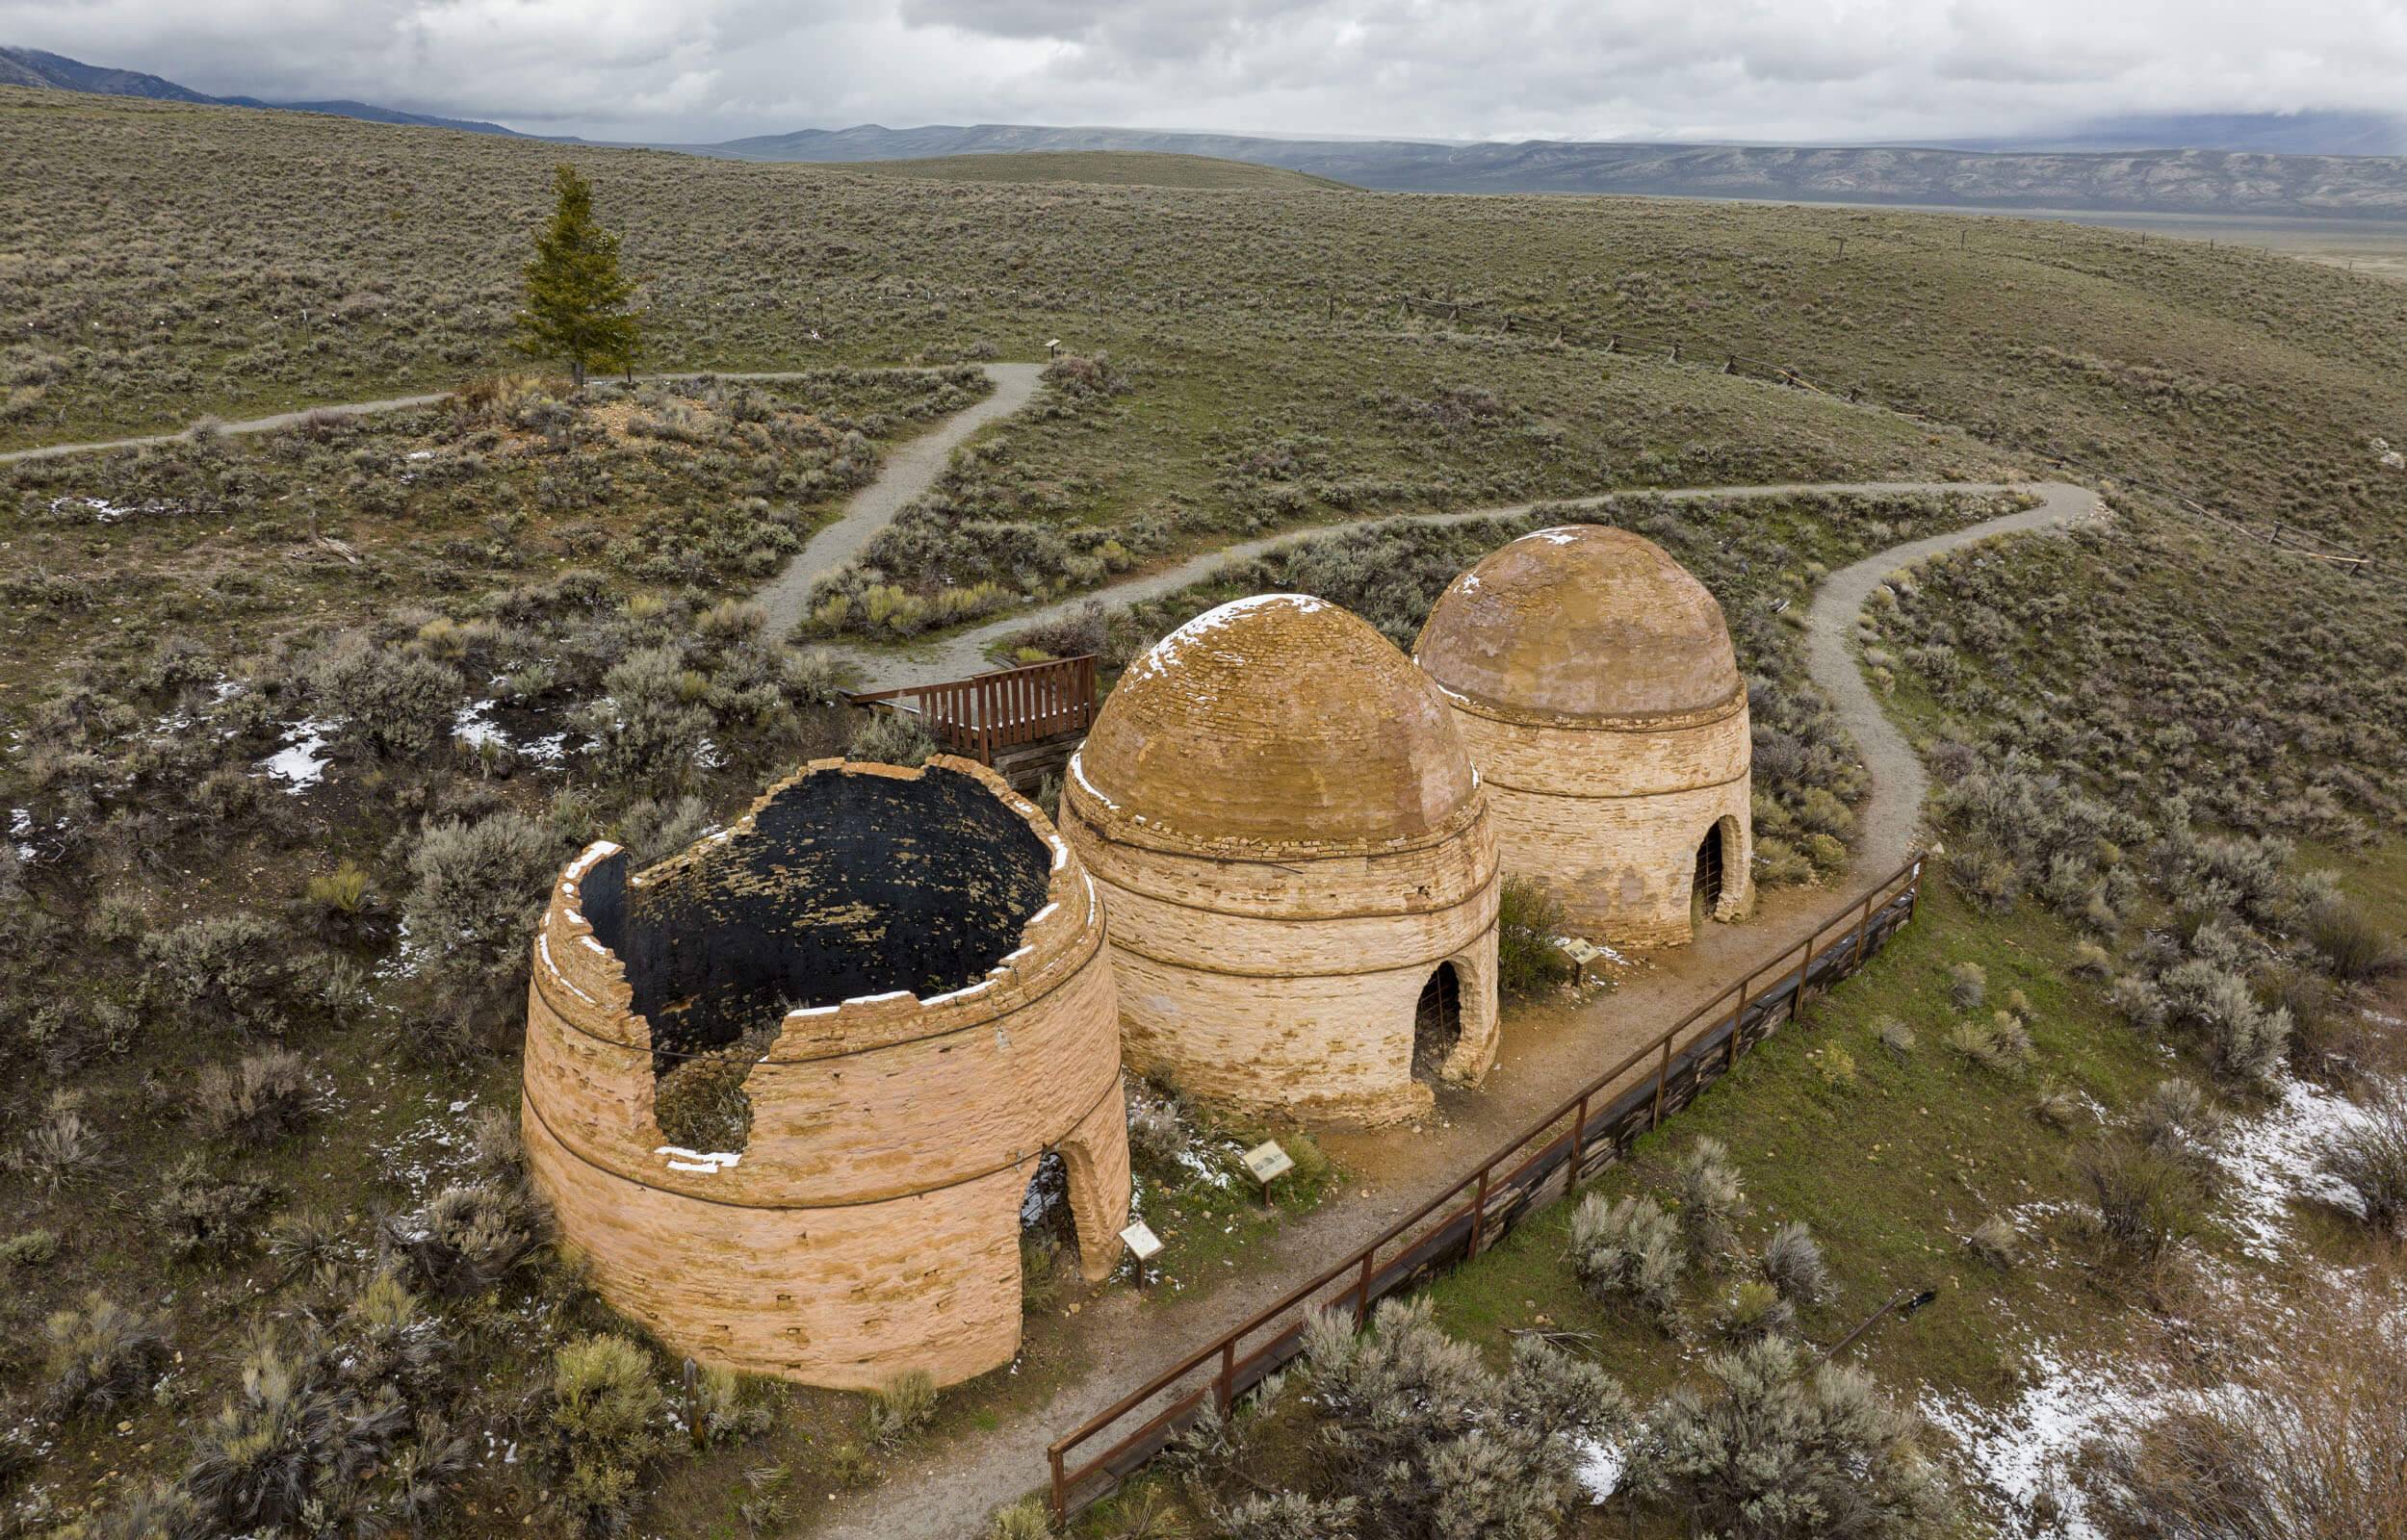 Aerial view of three stone charcoal kilns surrounded by an open landscape of brush, at the Charcoal Kilns Interpretive Site.